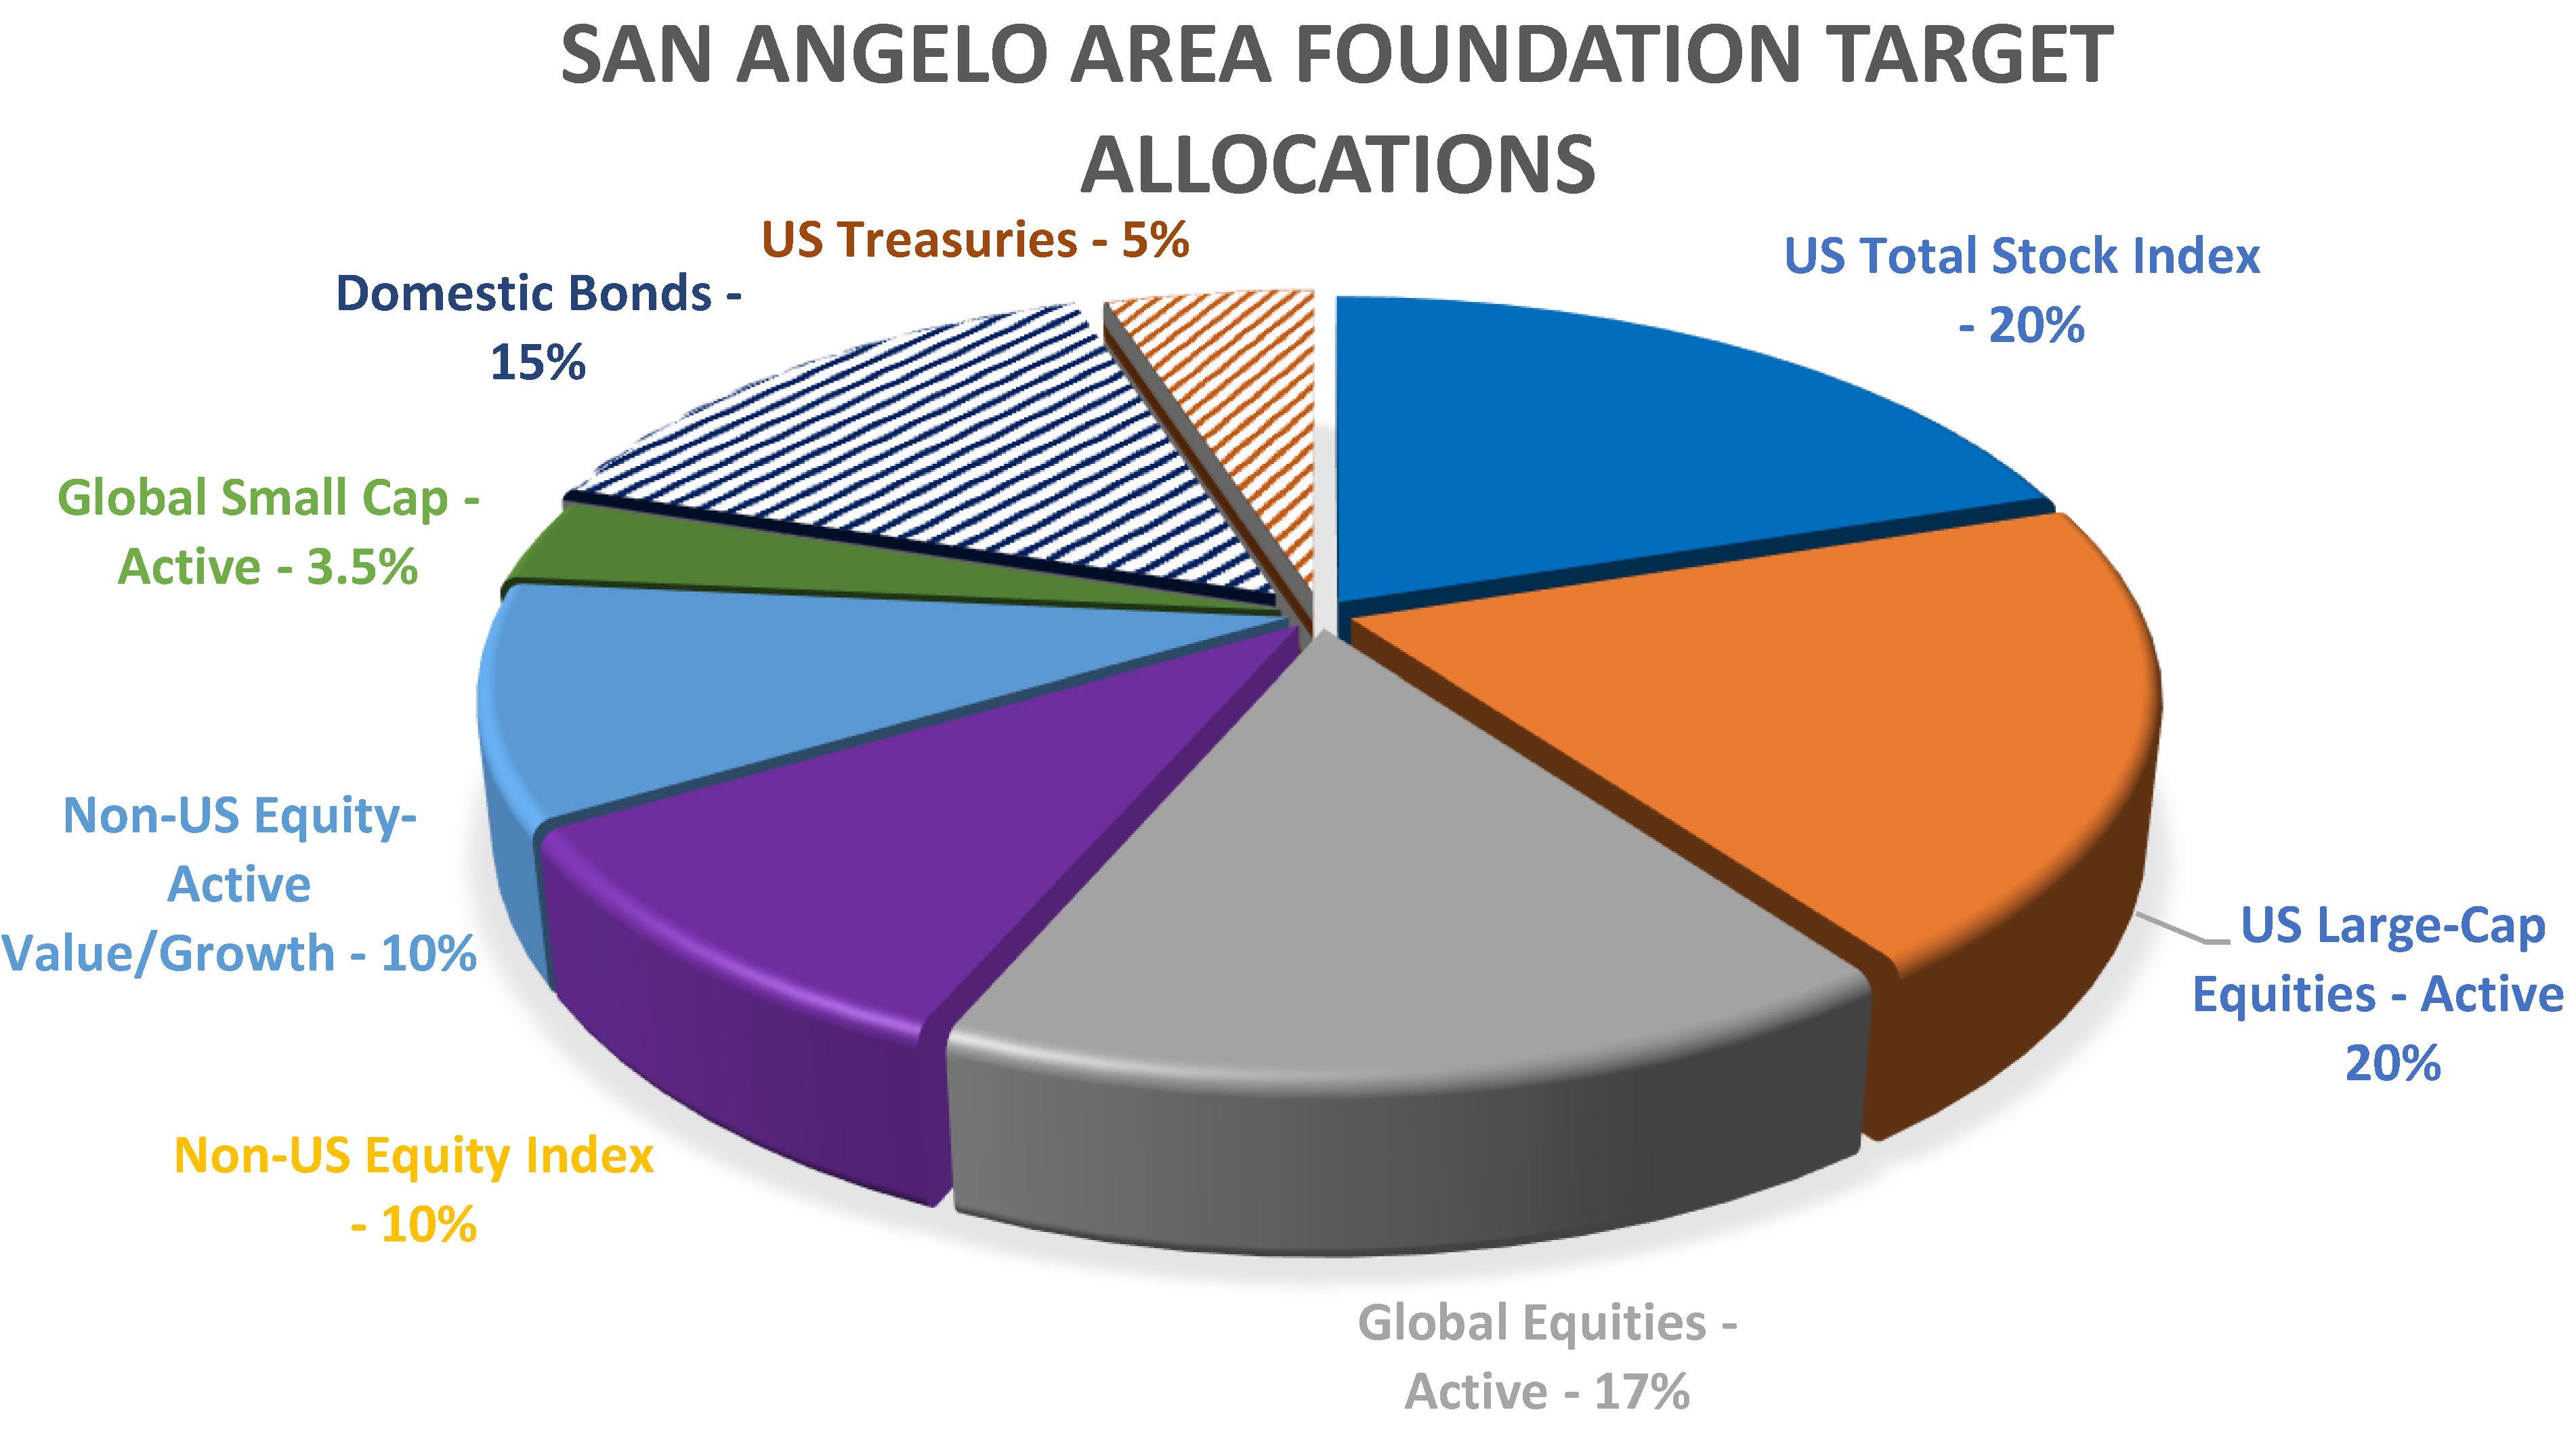 Investment Asset Allocation San Angelo Area Foundation